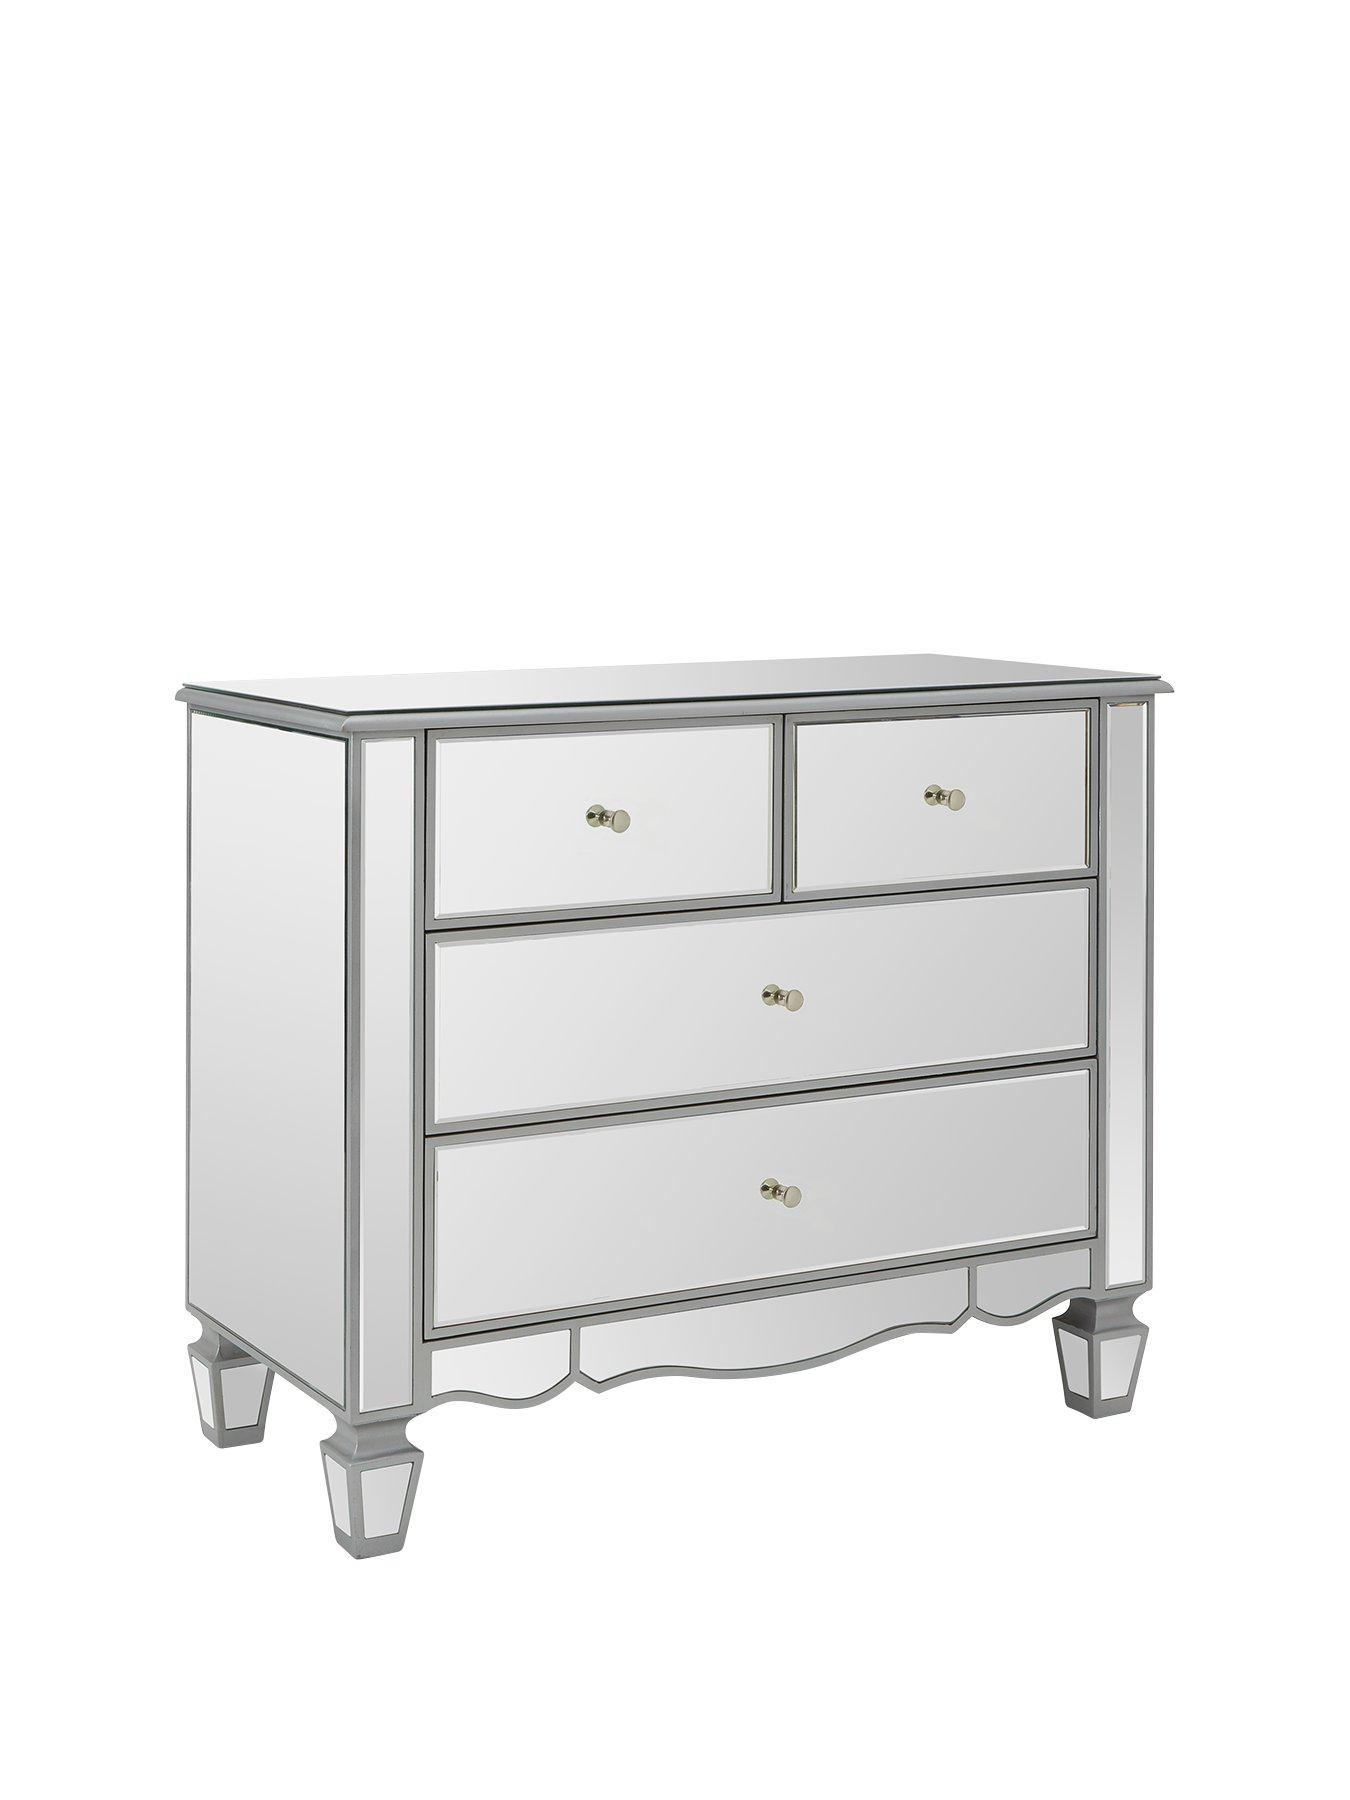 Cream 2+4 Chest of Drawers Solid Wood Tall Storage Bedroom Furniture Ivory White